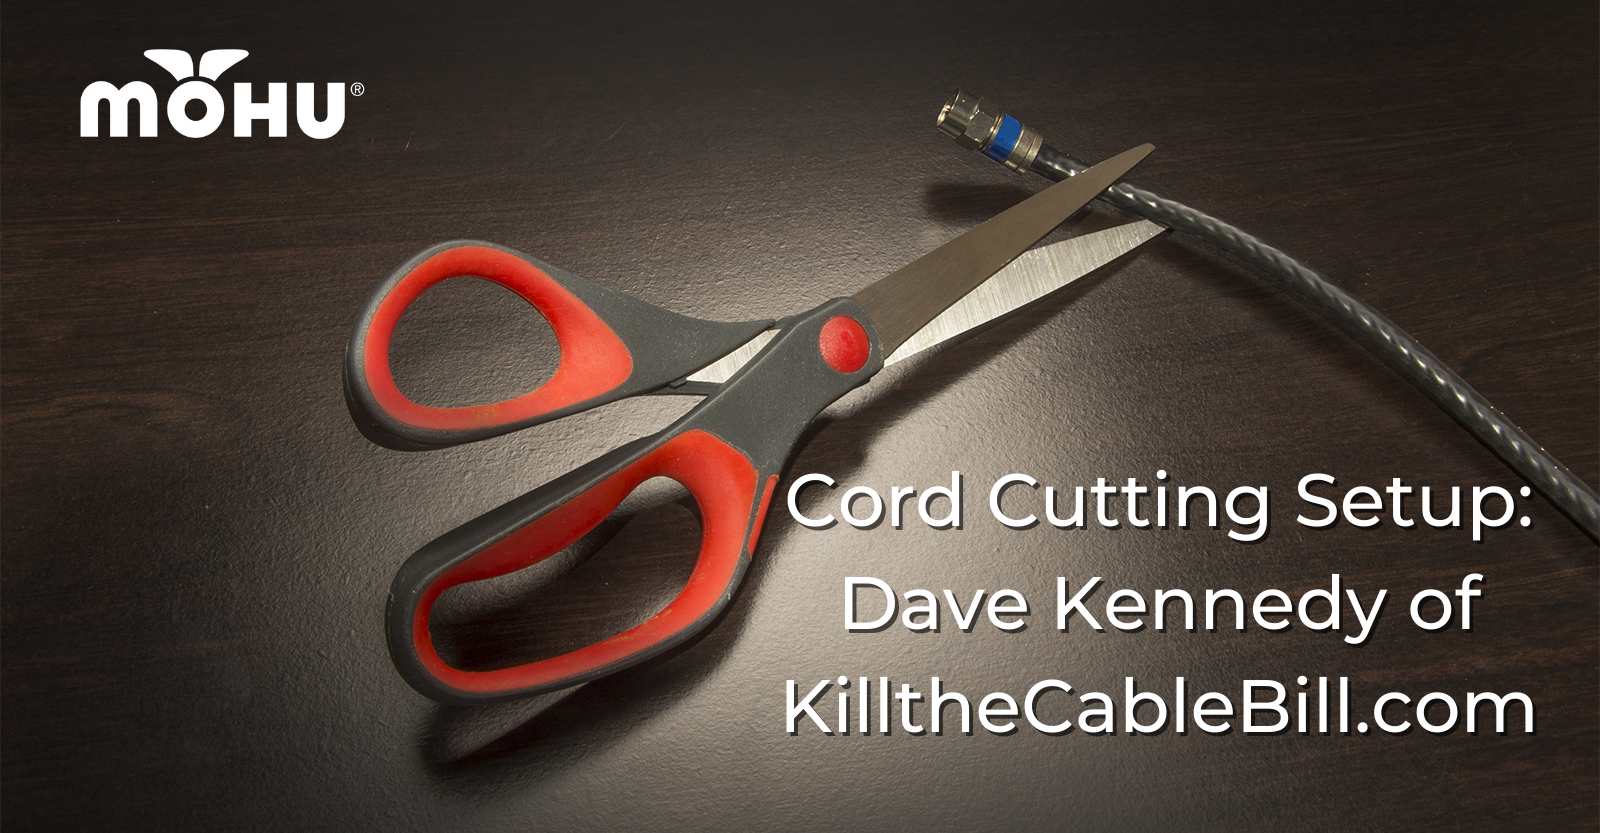 Scissors on dark background and table cutting a coaxial cable, Cord Cutting Setup Dave Kennedy of KilltheCableBill.com